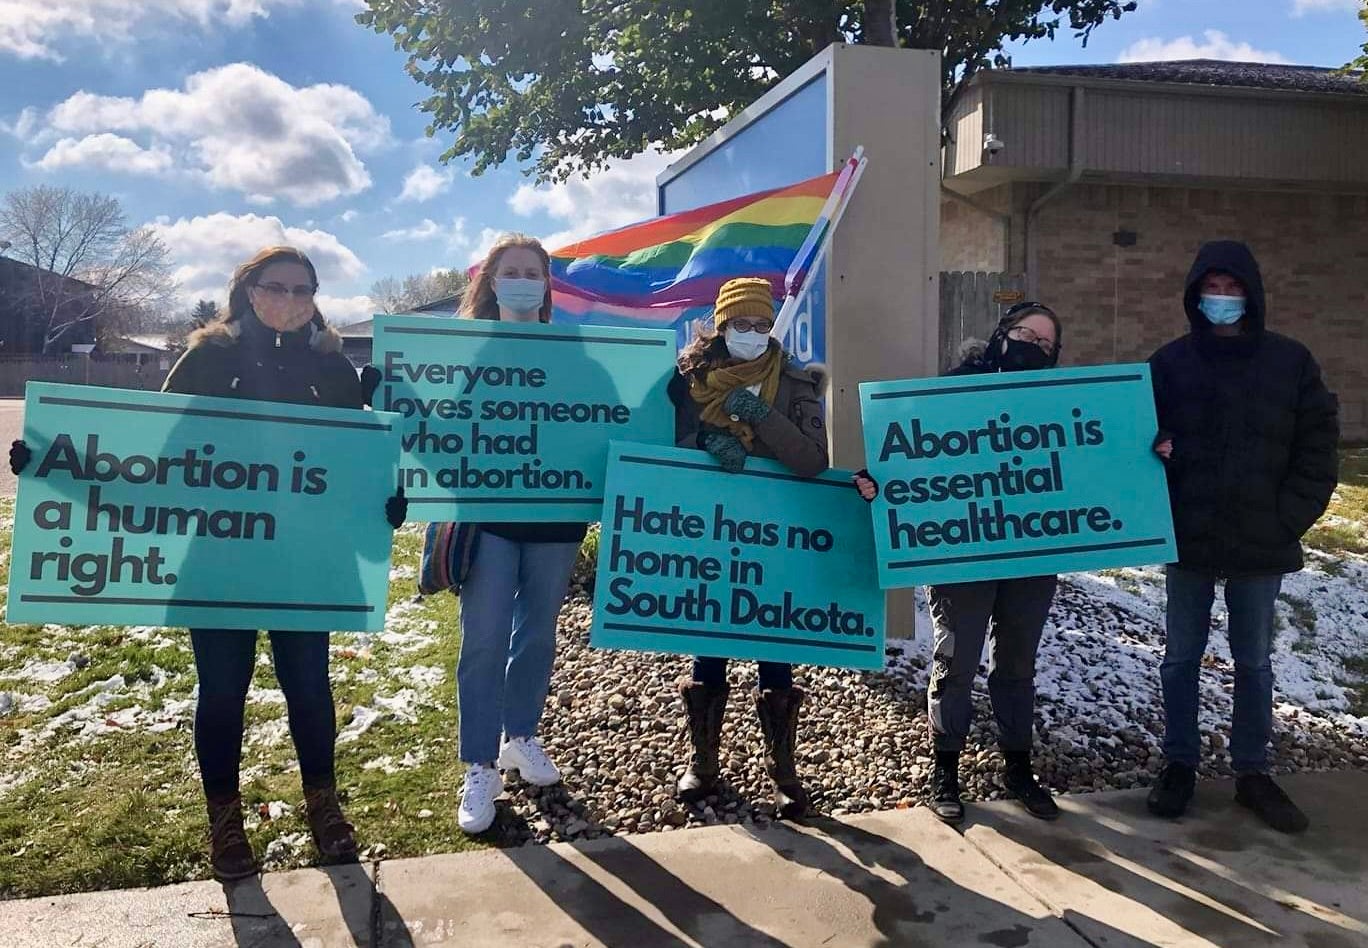 Abortion rights activists have held their own rallies outside of Planned Parenthood clinic in Sioux Falls